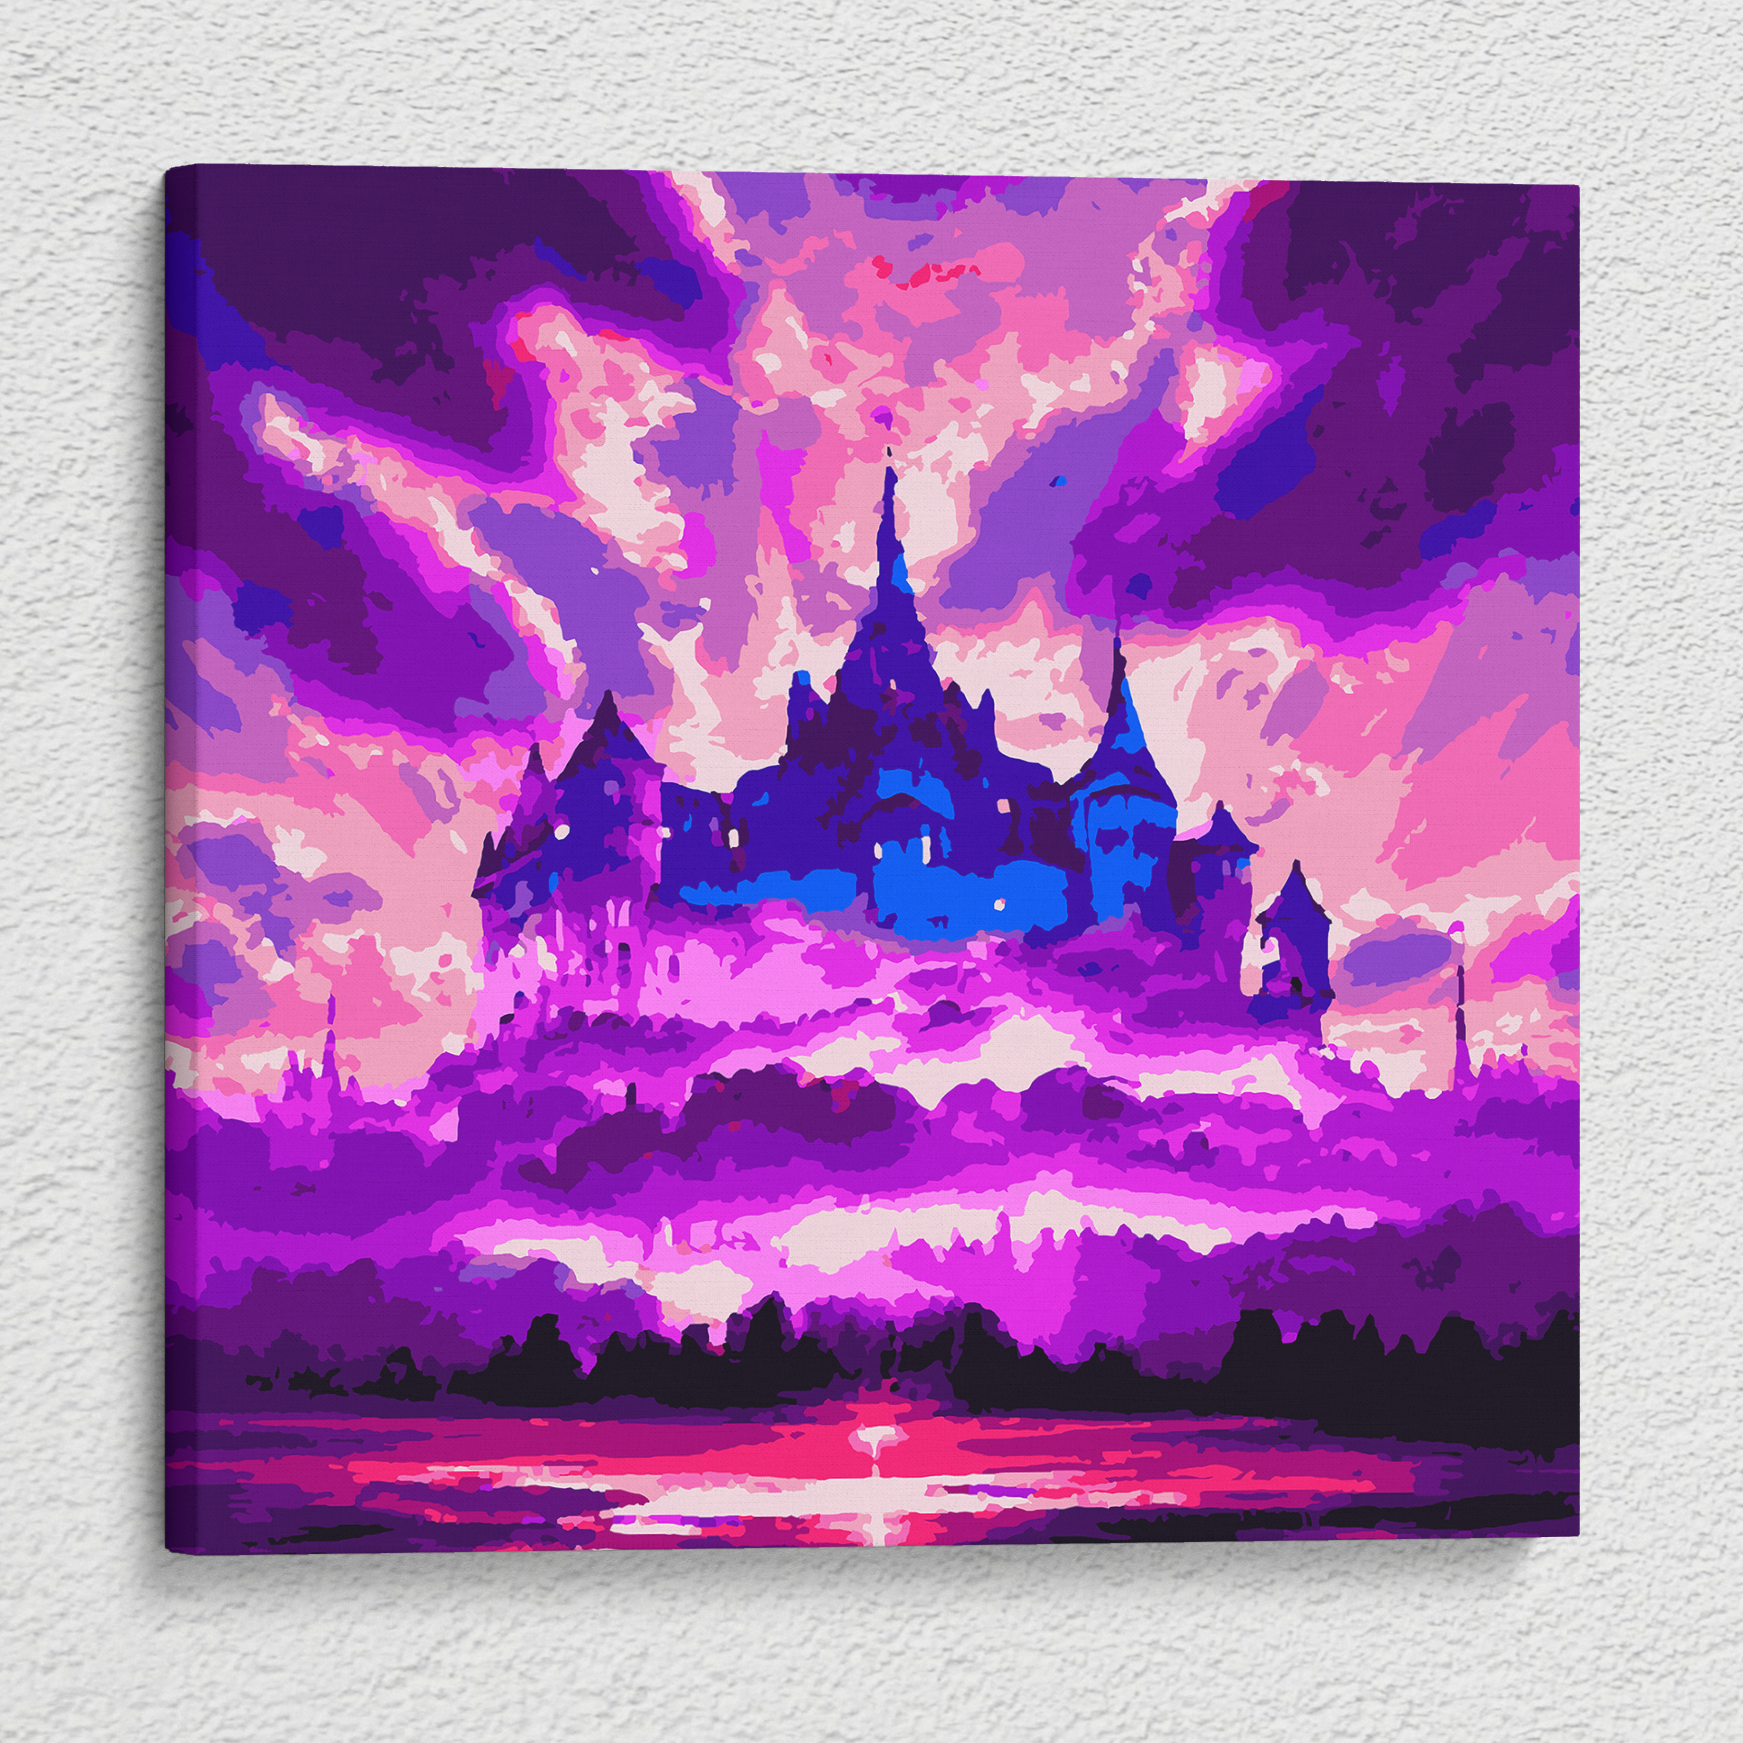 paint by numbers kit Disney castle above clouds